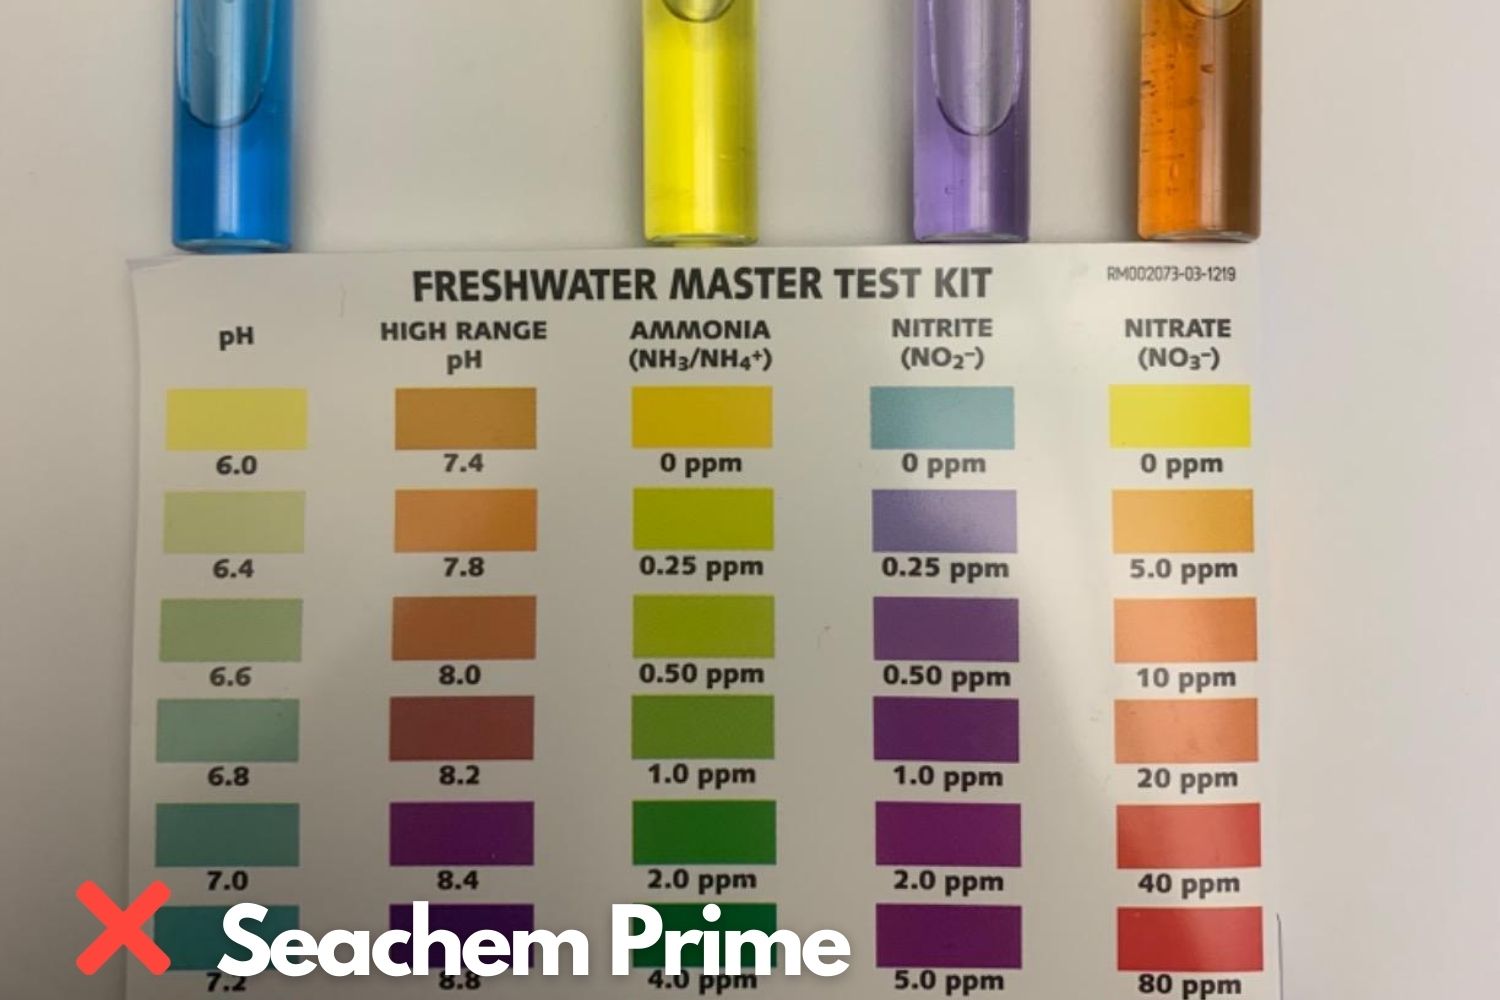 water condition before applying seachem prime